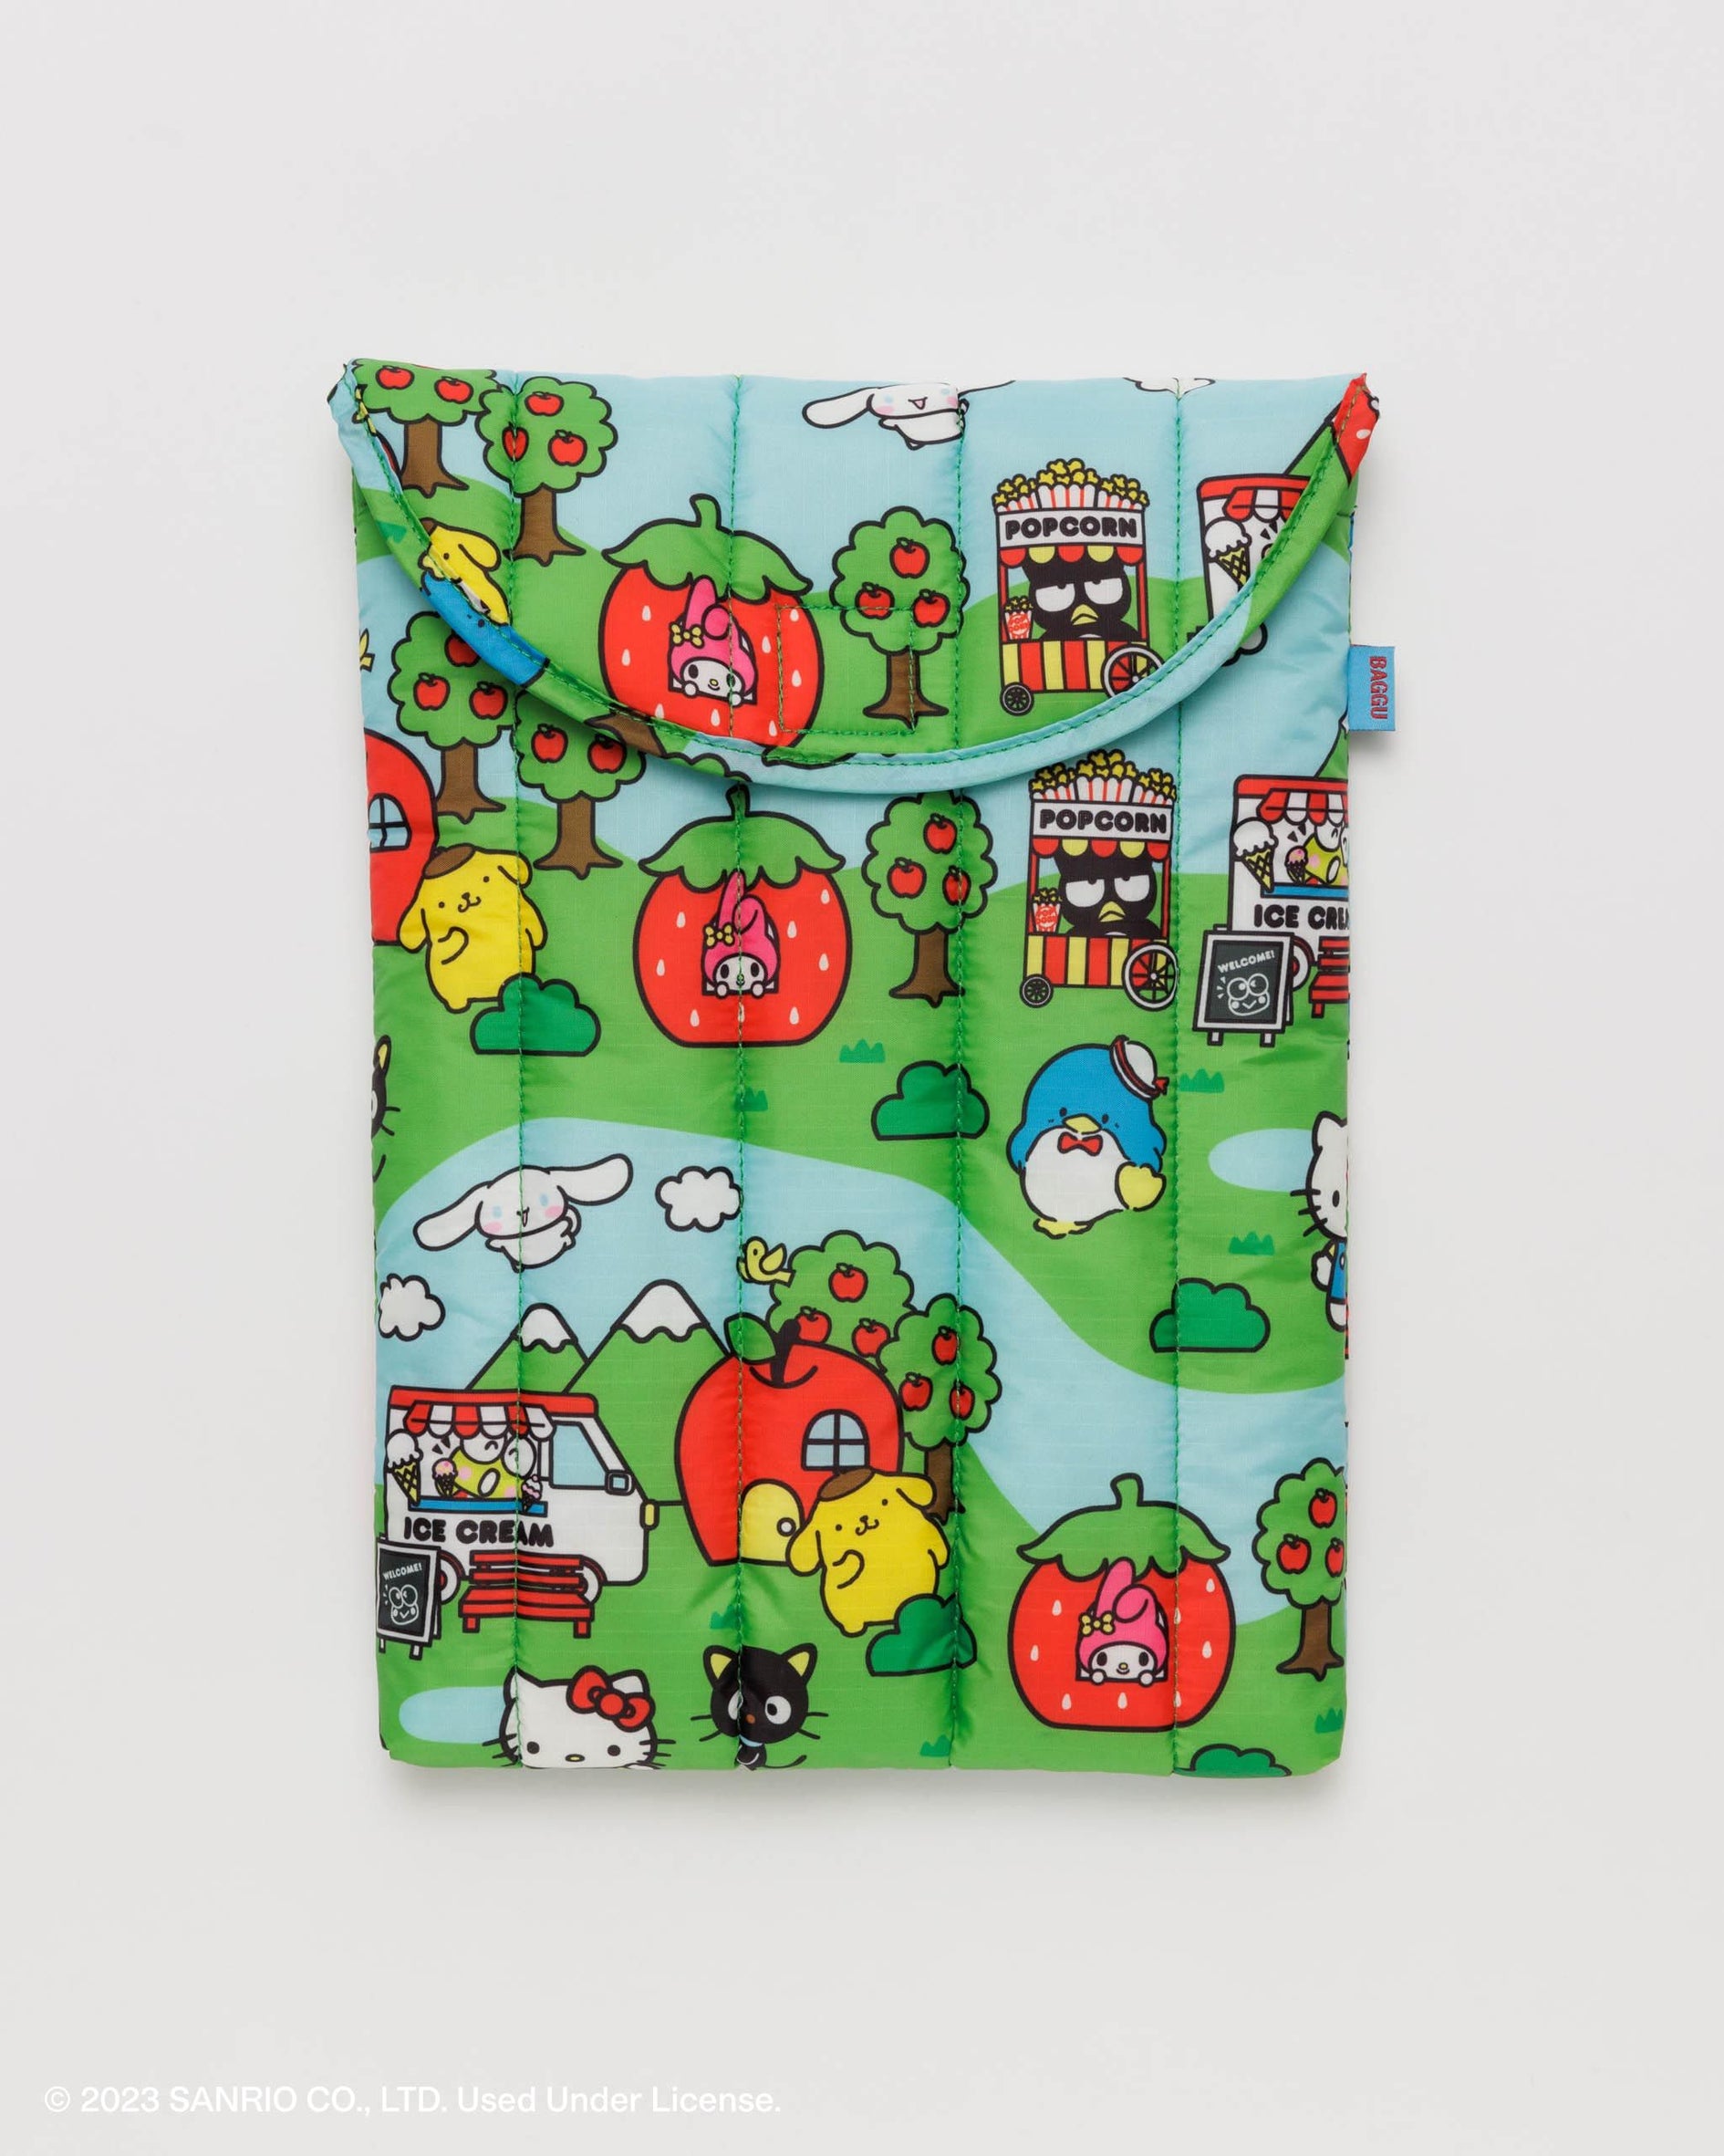 Hello Kitty and Friends x Baggu Puffy Lunch Bag